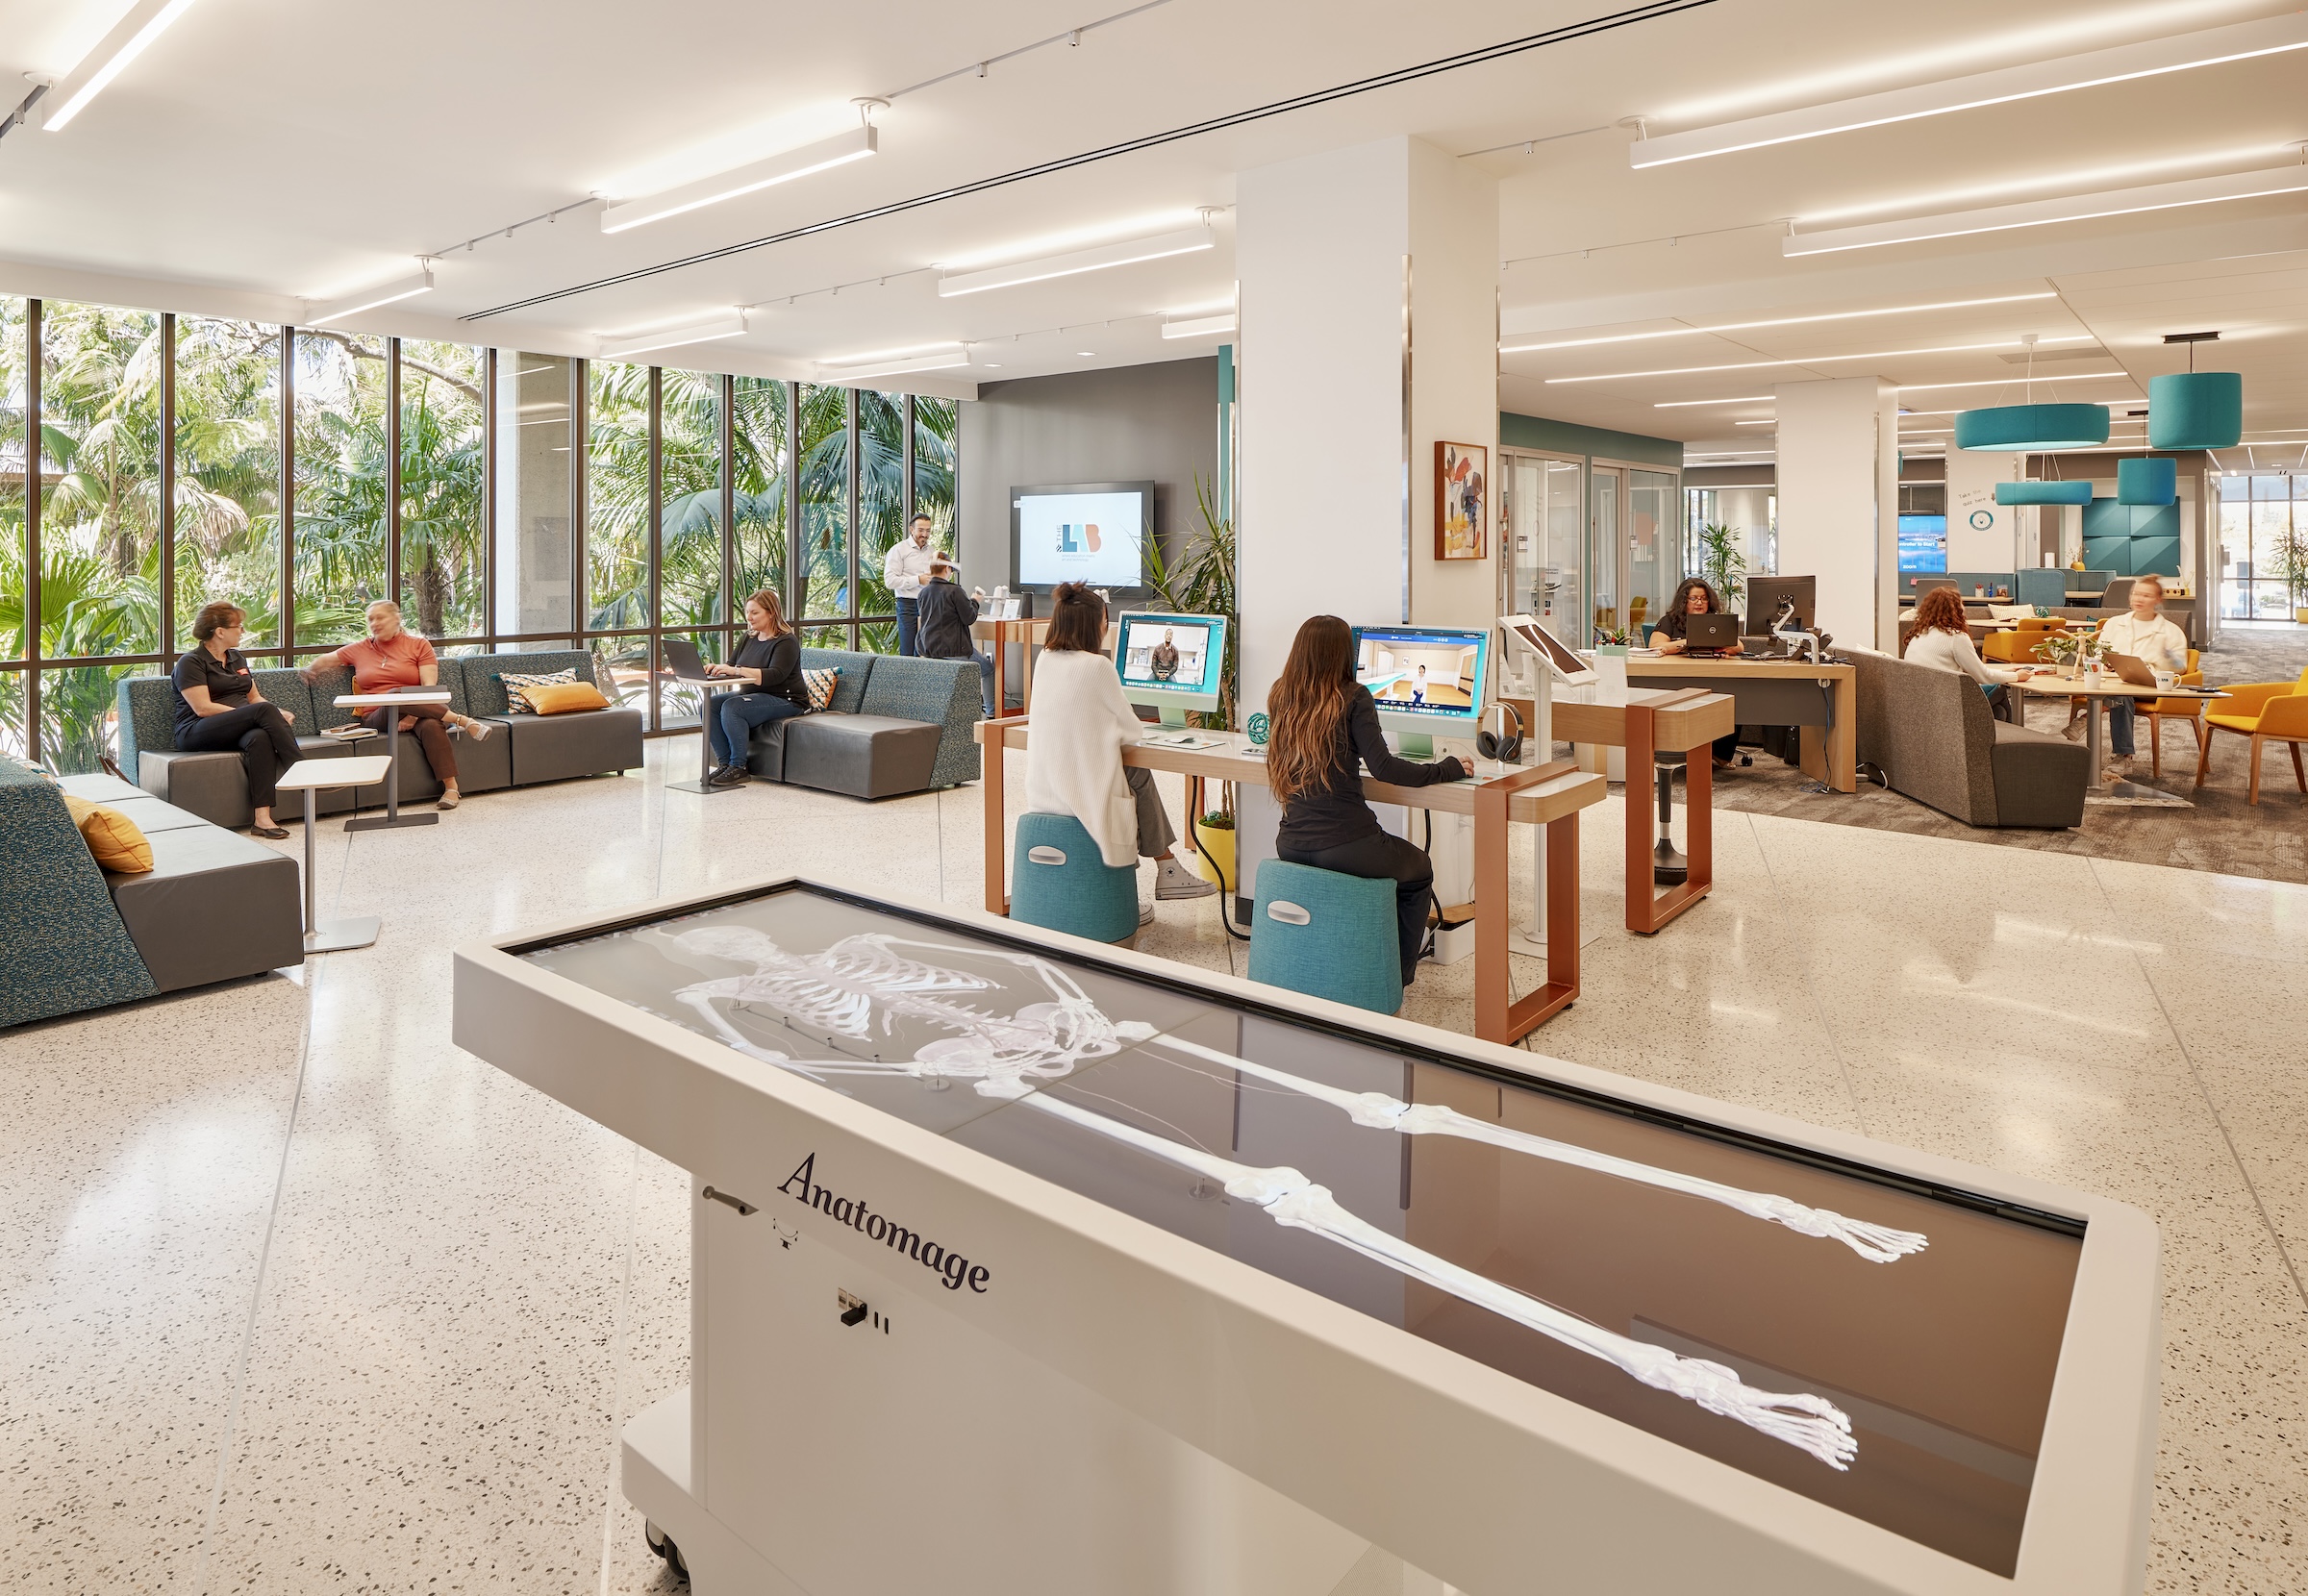 Top 100 Science + Technology Facility Architecture Firms for 2023 - West Coast University, Anaheim, Calif., designed by Gensler. Photo: Ryan Gobuty, courtesy Gensler